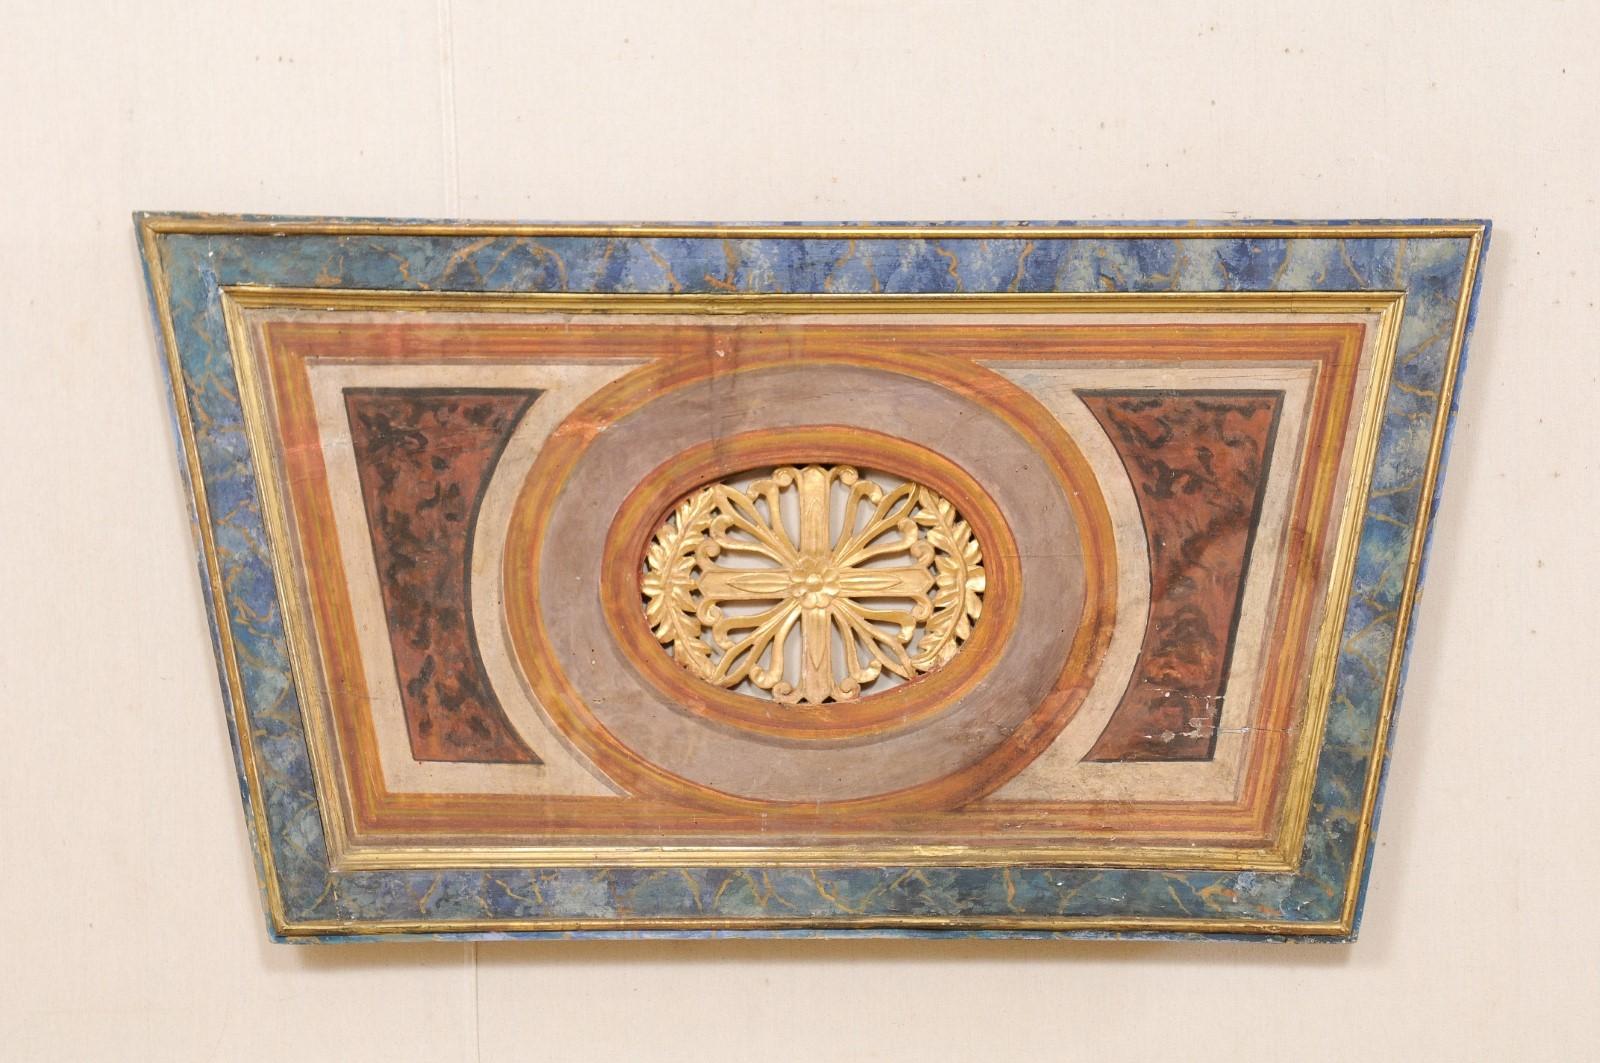 An Italian decorative wall plaque with trapezoid shape from the 19th century. This antique wall ornament from Italy has an inverted trapezoid shape, with oval center comprised of a pierced carved floral medallion flanked within a pair of leaves. The